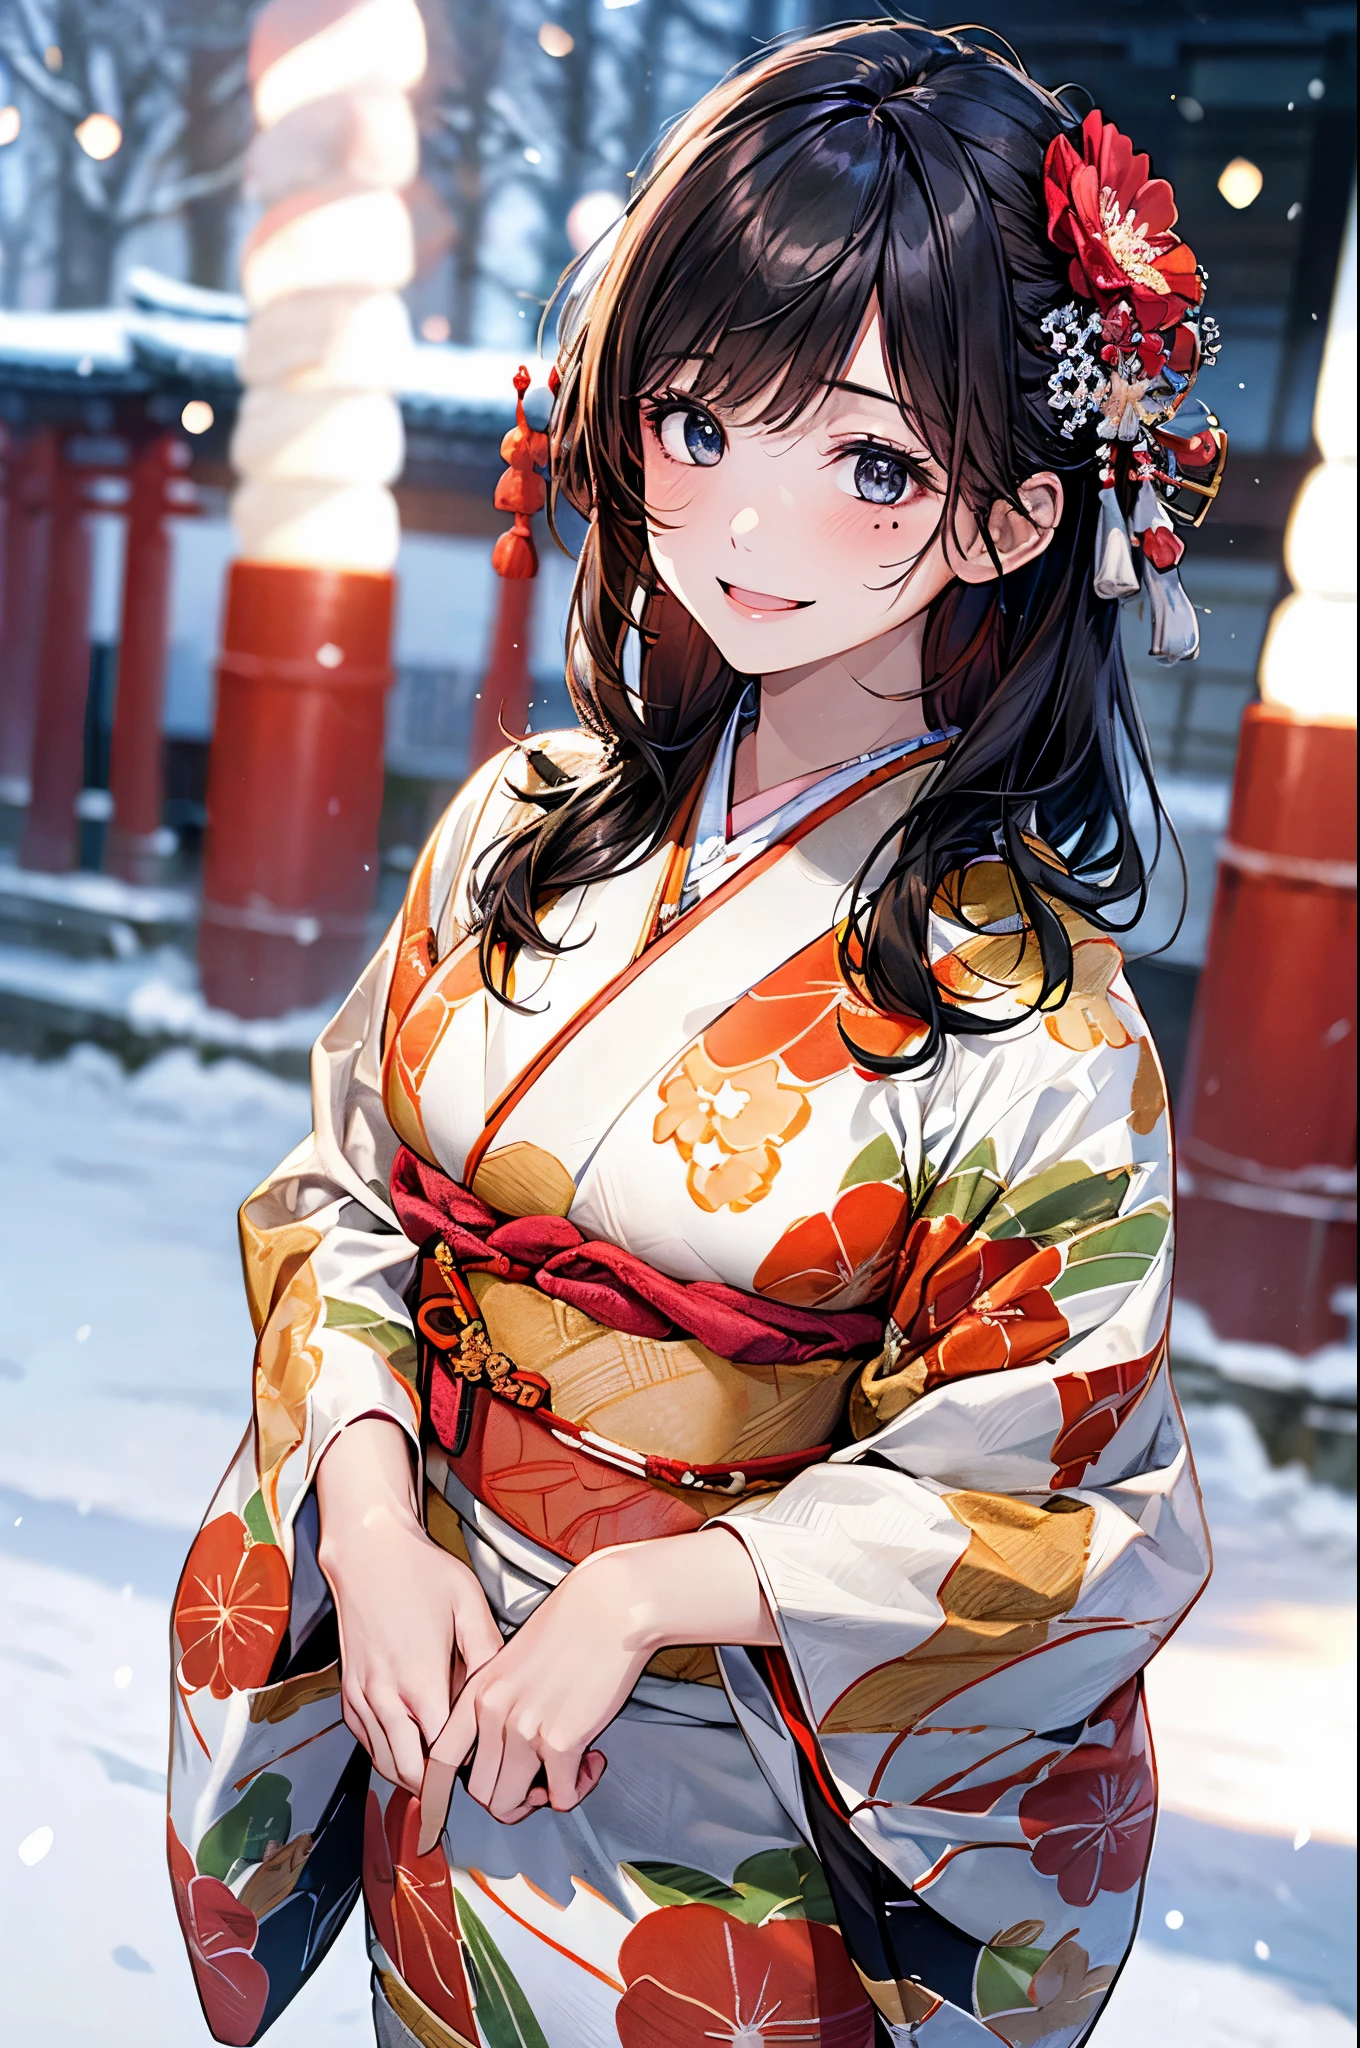 ((perfect anatomy, anatomically correct, super detailed skin)), 
1 girl, japanese, high school girl, shiny skin, large breasts:0.5, looking up, watching the view, 
beautiful hair, beautiful face, beautiful detailed eyes, (middle hair:1.5, japanese hair:1.5), black hair, blue eyes, babyface, mole under eye, 
(((red floral kimono), hair ornament)), 
((smile:1.5, open your mouth wide)), walking, 
(beautiful scenery), winter, dawn, (new year's day, first visit), hokkaido, sapporo, outside hokkaido shrine, crowd, snow, snowfall:1.5, freezing weather, frost, 
(8k, top-quality, masterpiece​:1.2, extremely detailed), (photorealistic), beautiful illustration, natural lighting,